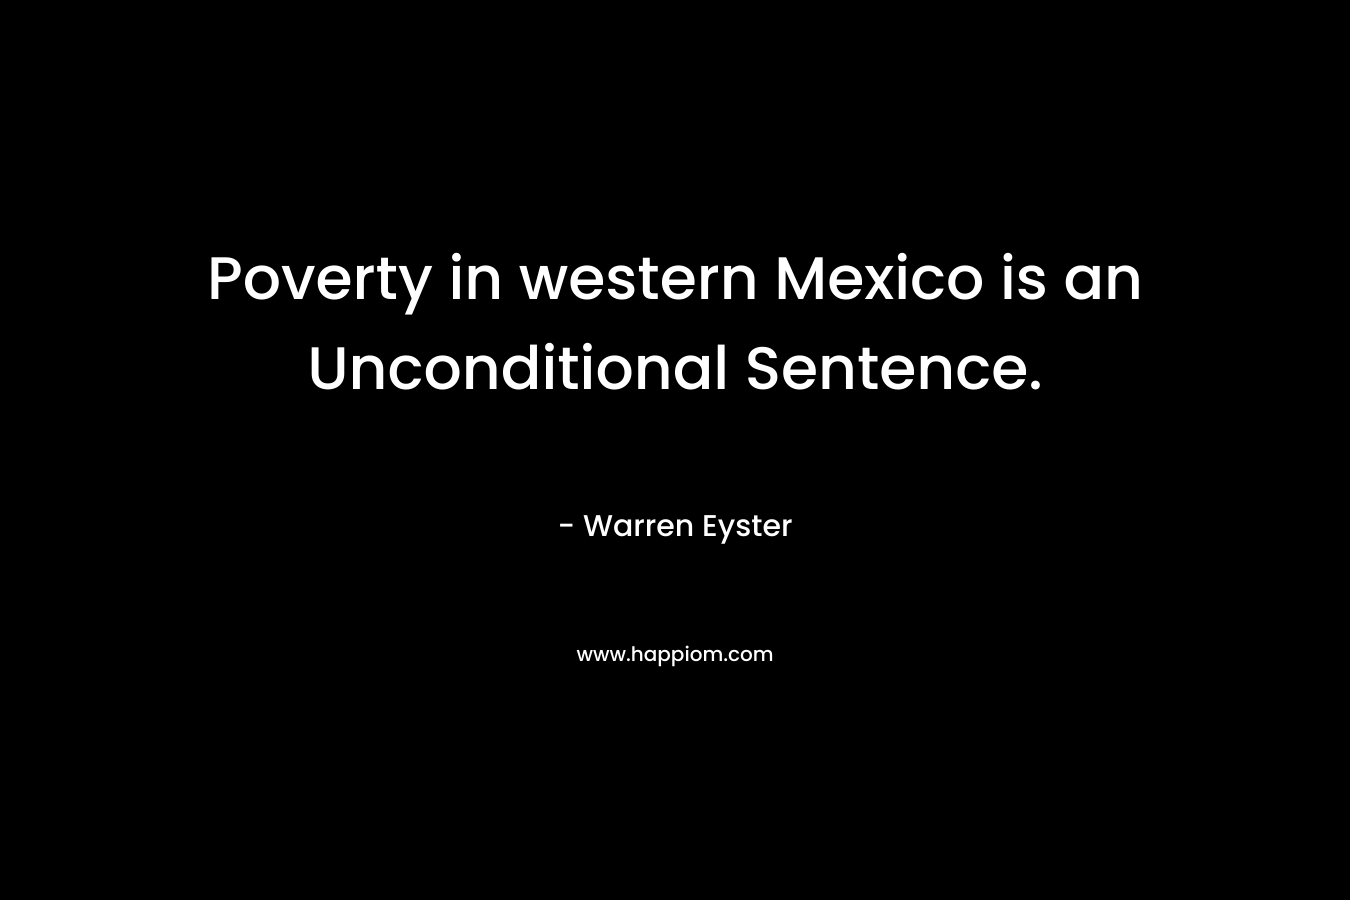 Poverty in western Mexico is an Unconditional Sentence.